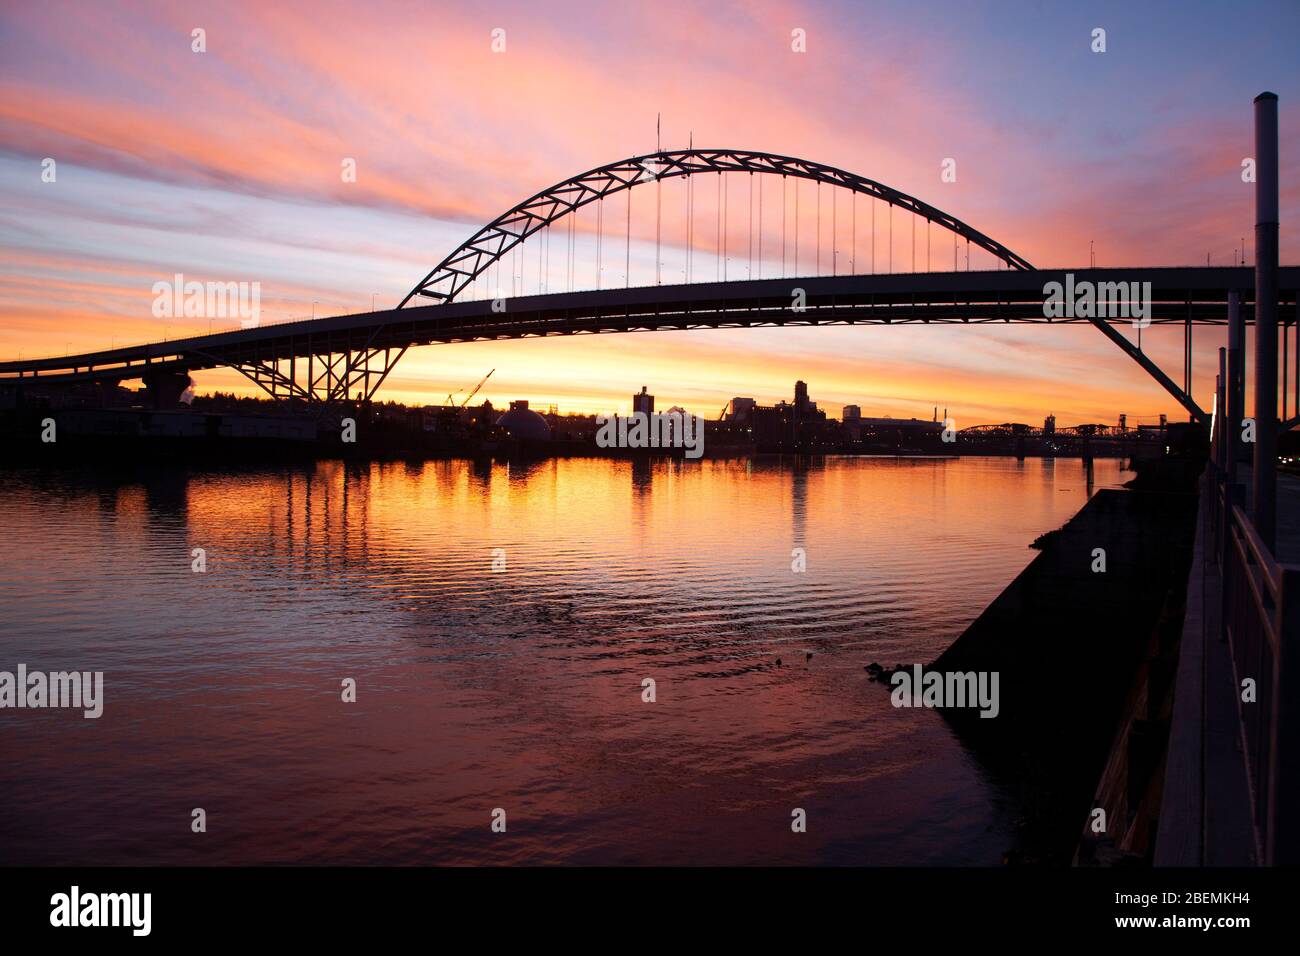 Fremont Bridge in Portland with a pink sunrise sky Stock Photo